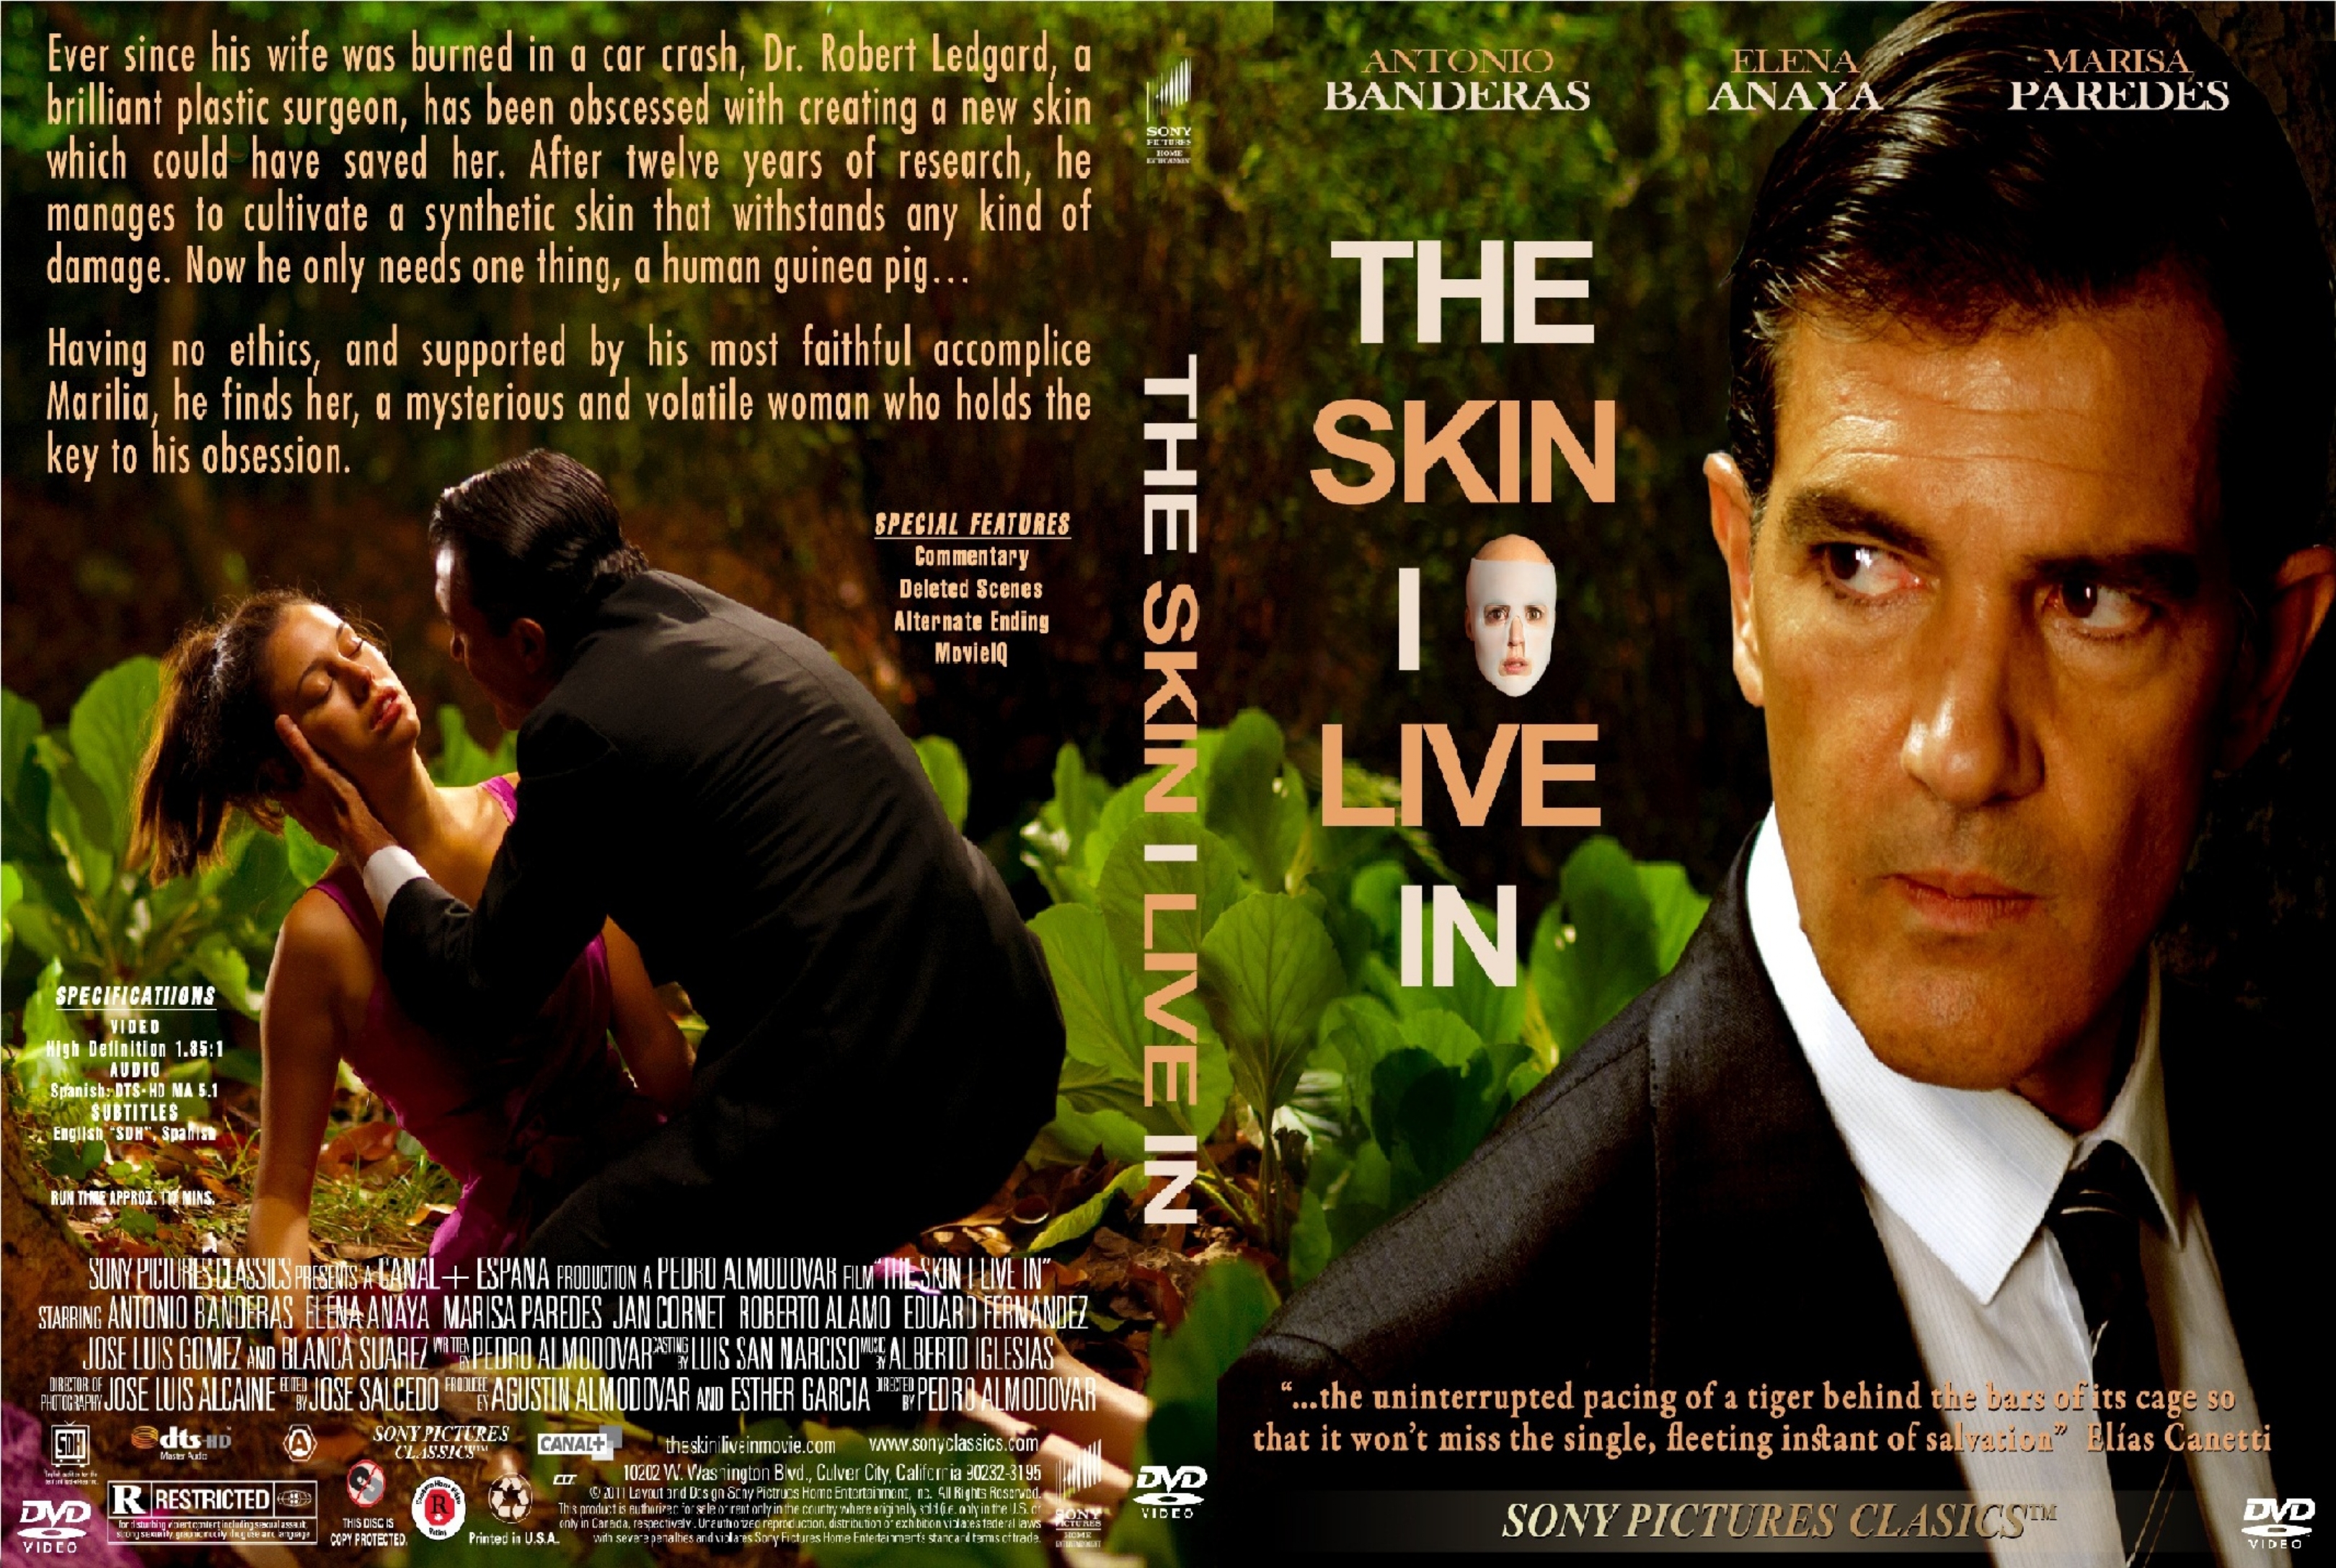 under the skin dvd cover